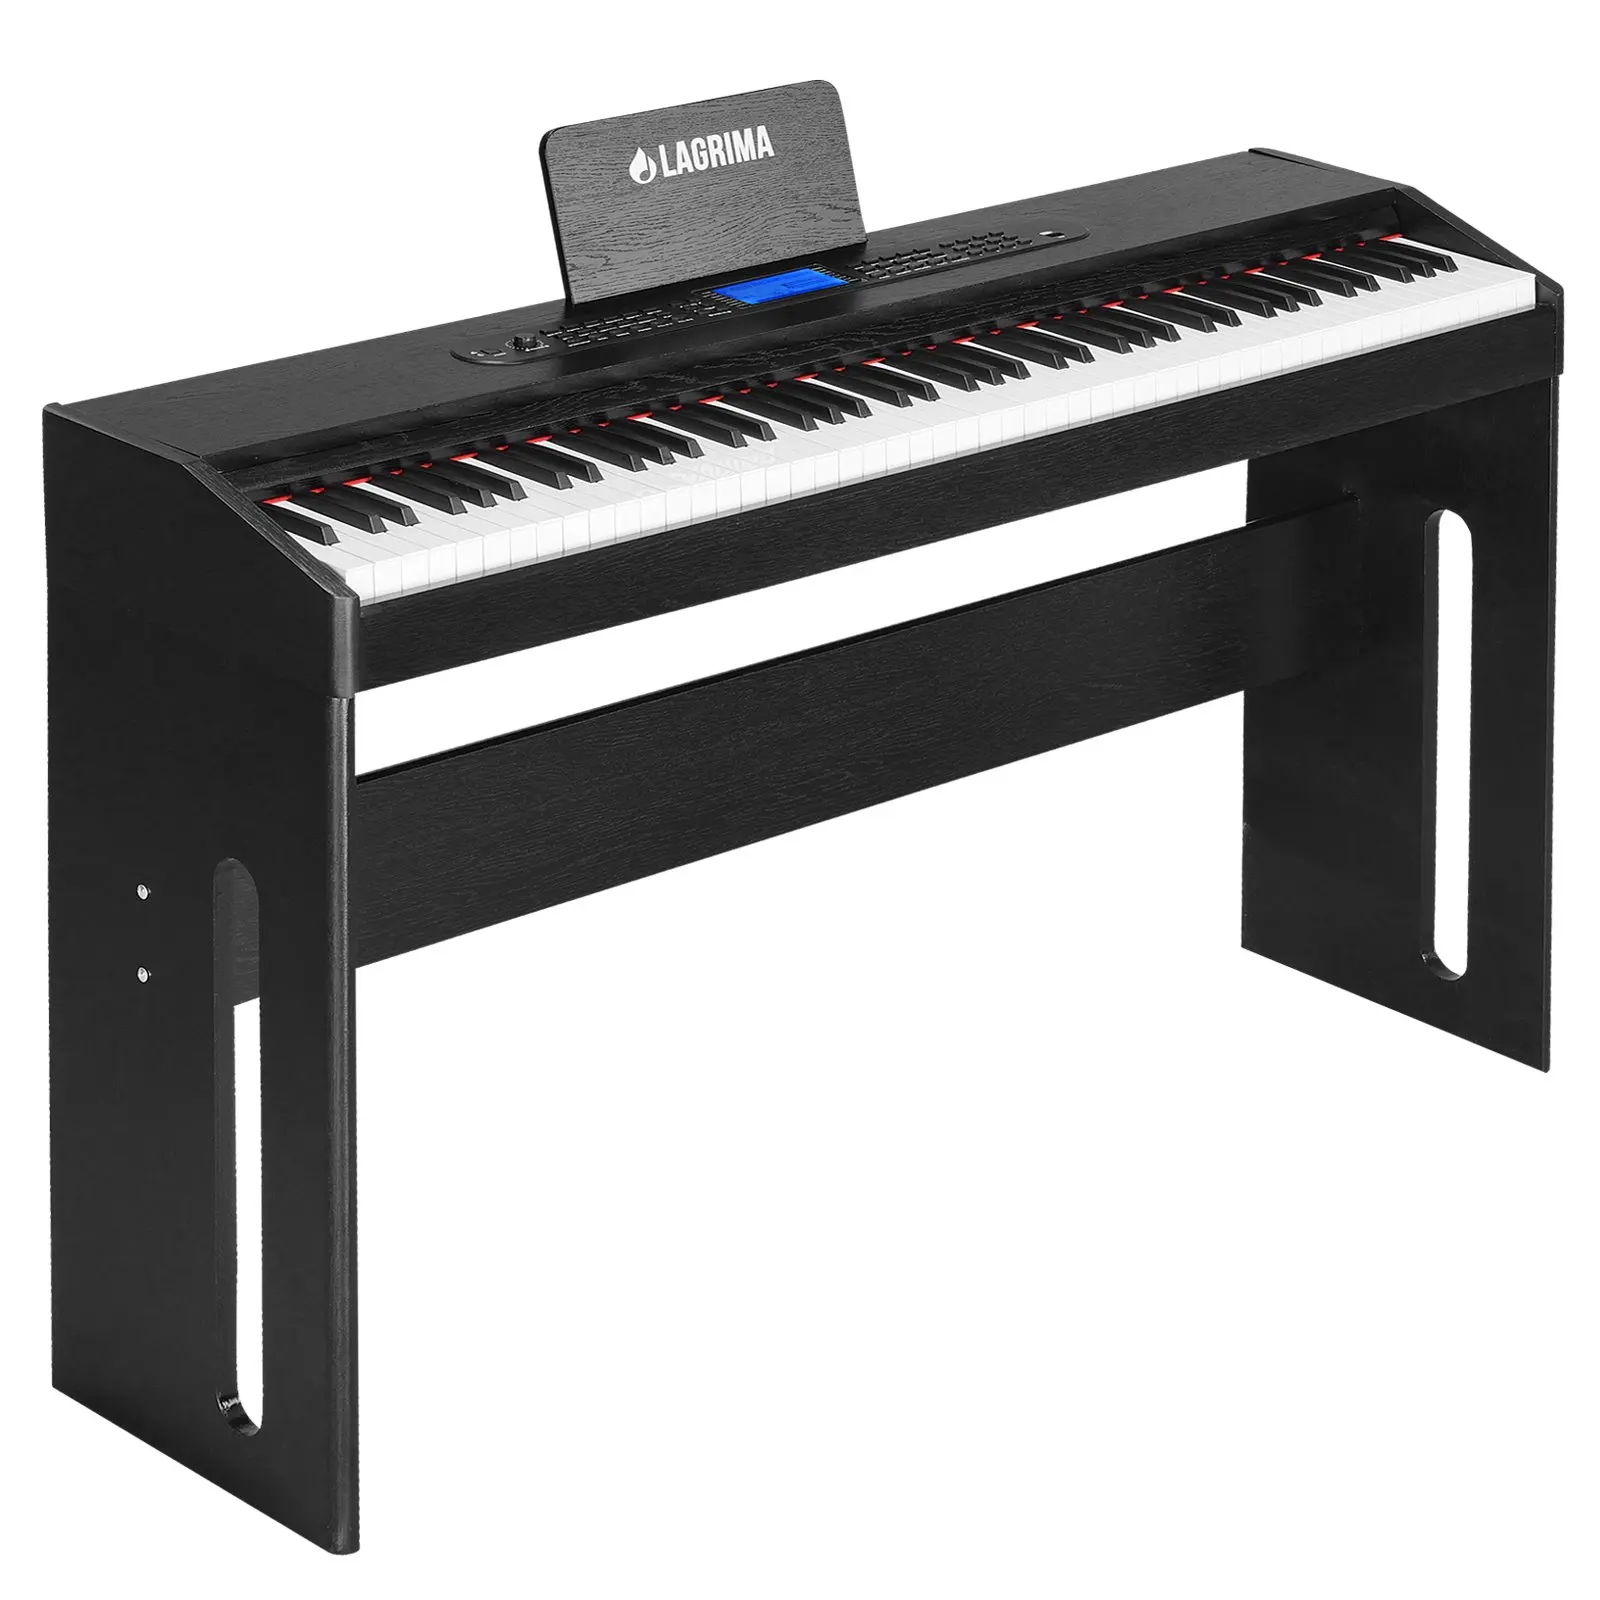 Neewer Collapsible Piano Keyboard Stand for 61-key 76-key Renewed Black 88-key Keyboard with Adjustable Height from 25.6to 43.3/65cm to 110cm and Length from 29to 51.2/73cm to 130cm 